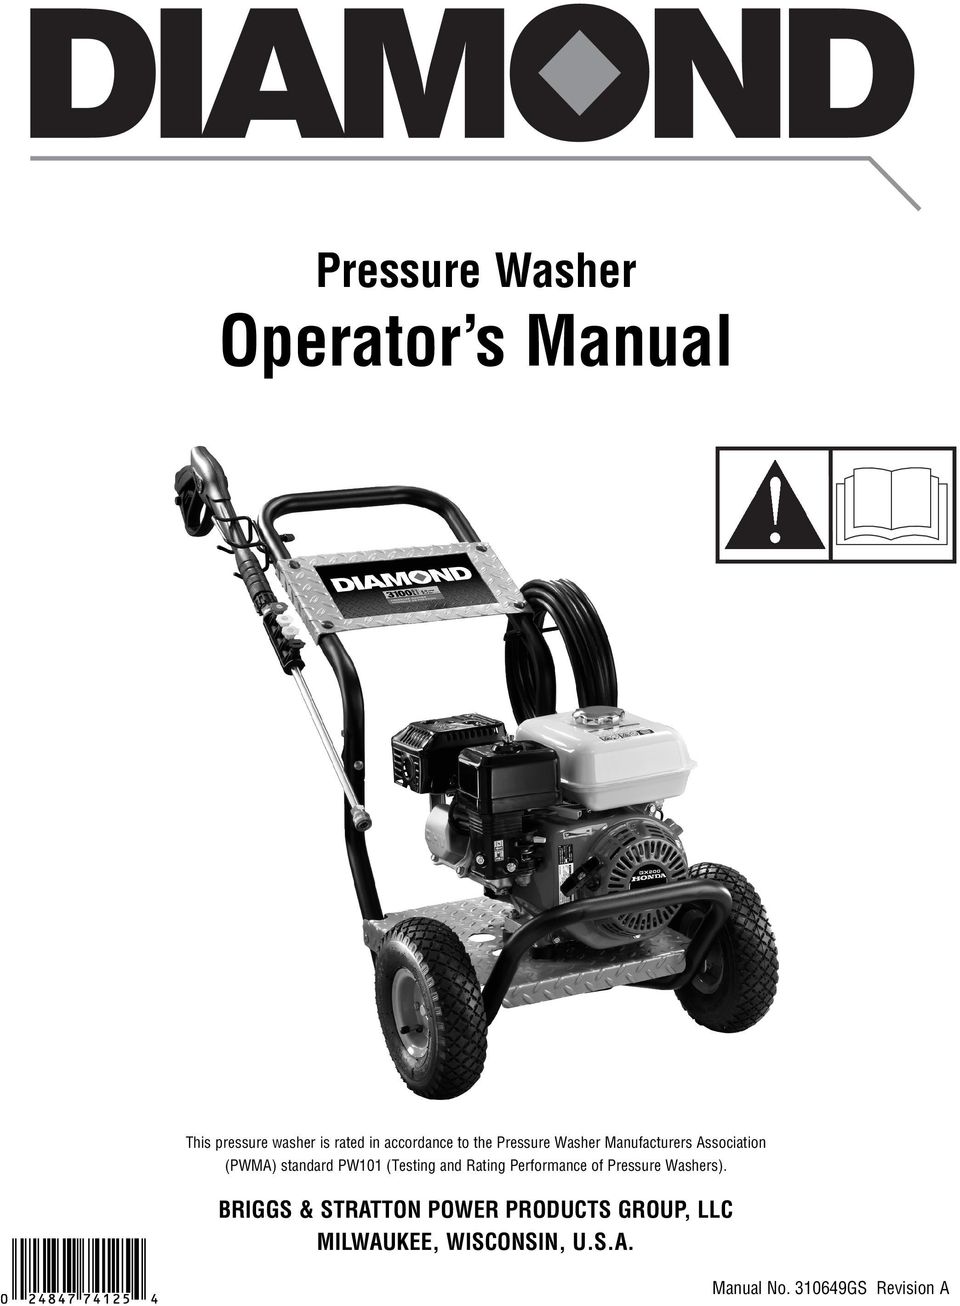 PW101 (Testing and Rating Performance of Pressure Washers).